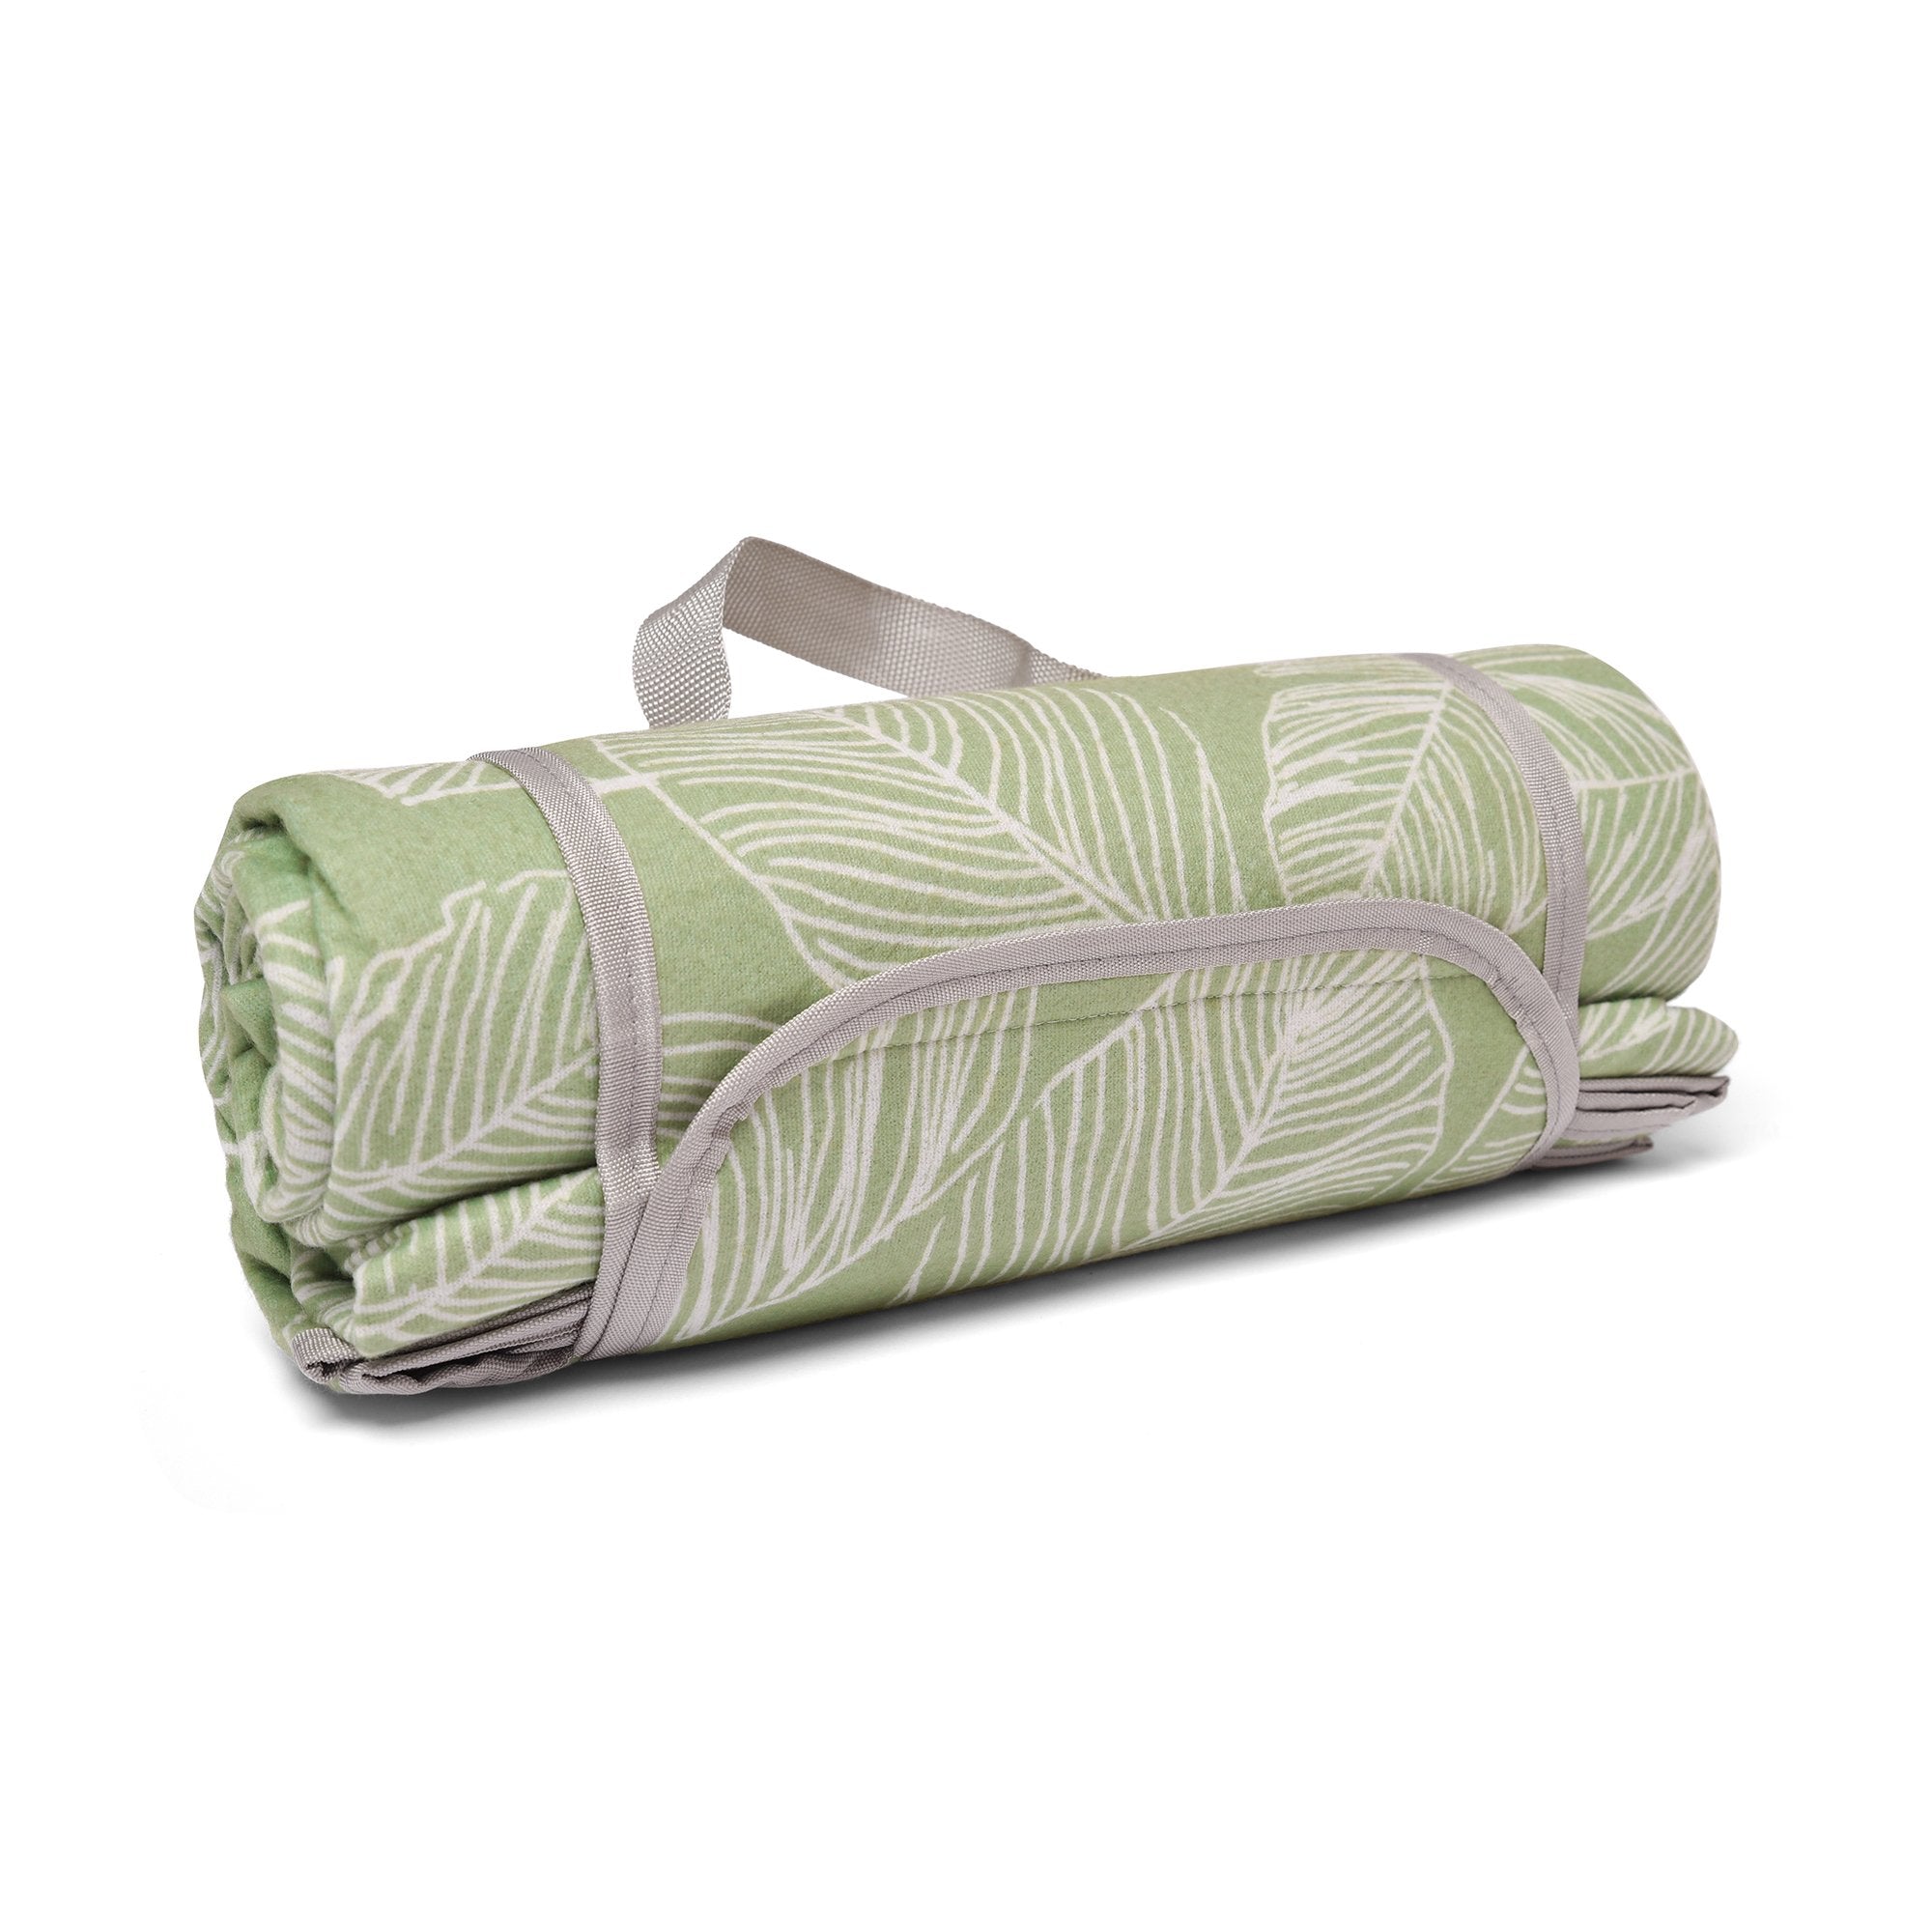 Picnic Blanket Matteo by Fusion in Green